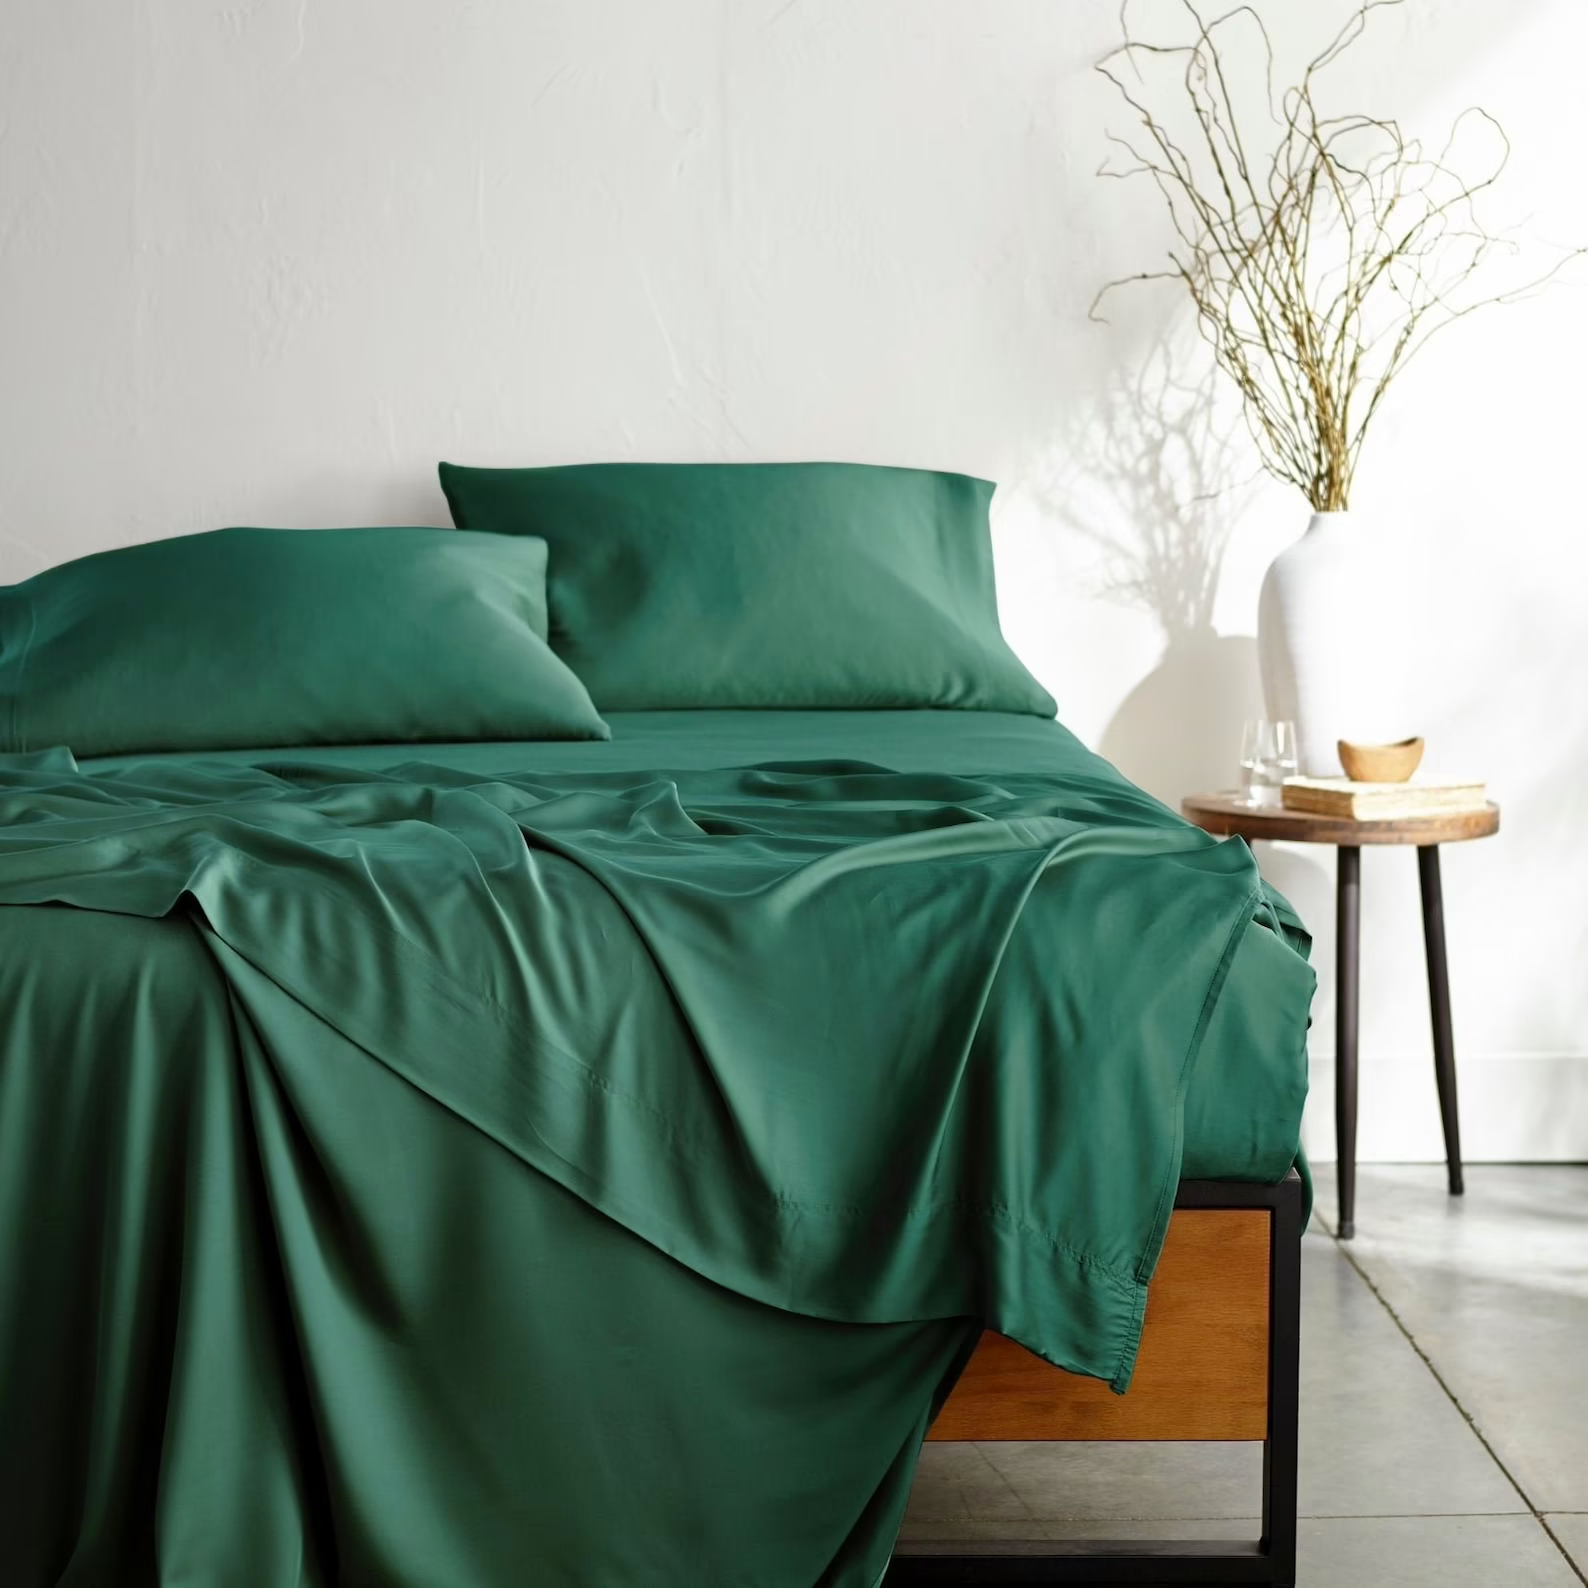 Hypoallergenic Cool and Breathab Silky Soft Touch Details about   100% Natural Bamboo Sheets 